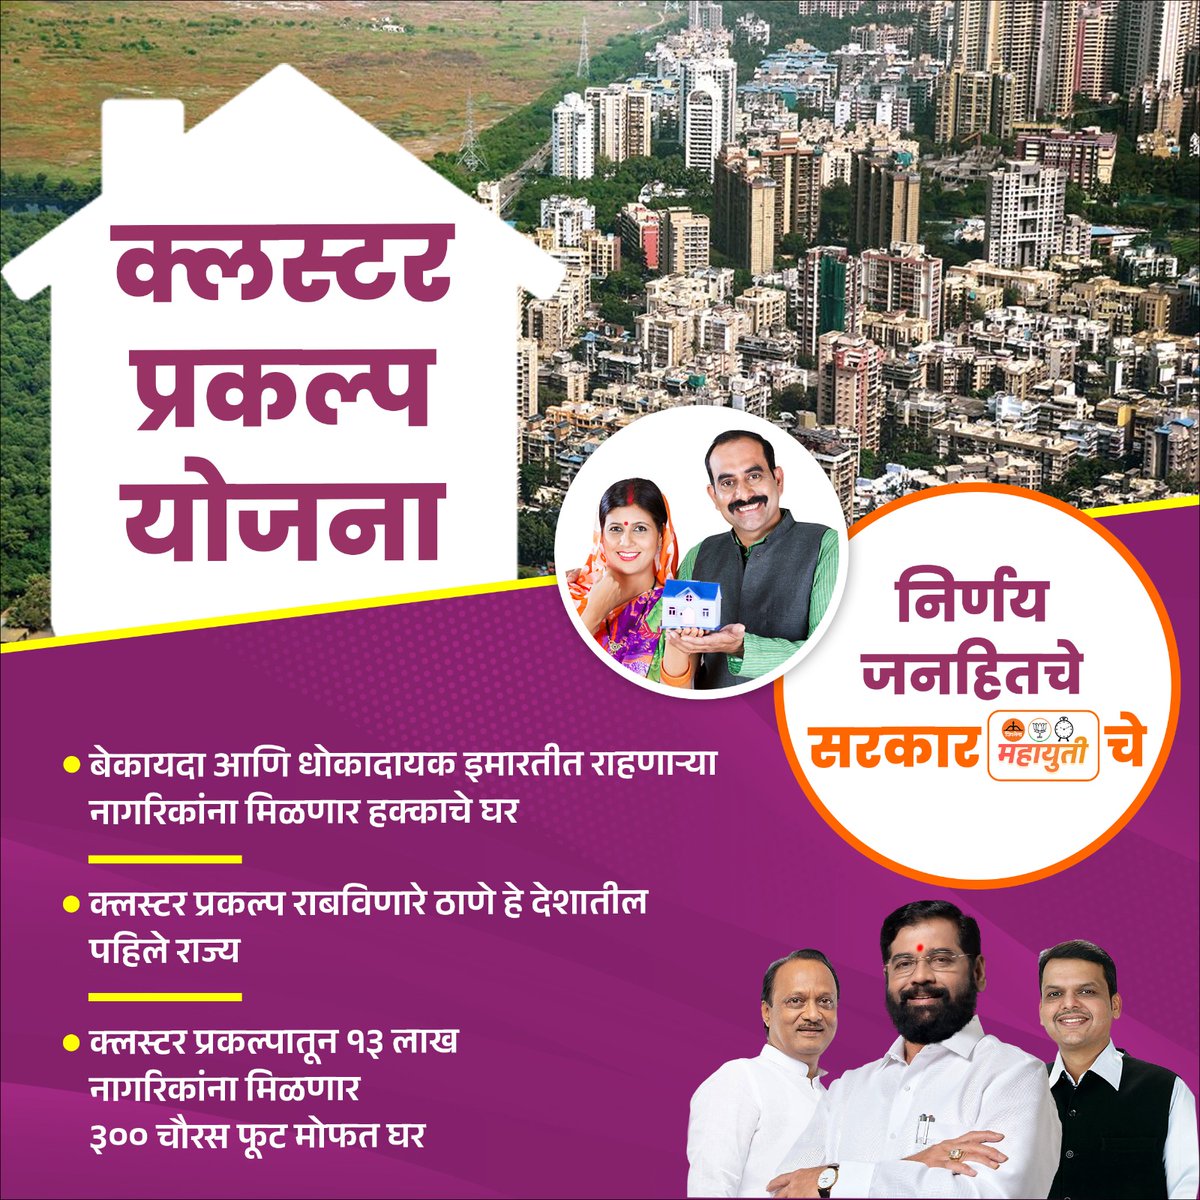 Thane sets an inspiring example by prioritizing citizens' safety and rights with its innovative cluster project. Kudos to CM Eknath Shinde Govt for leading the way!